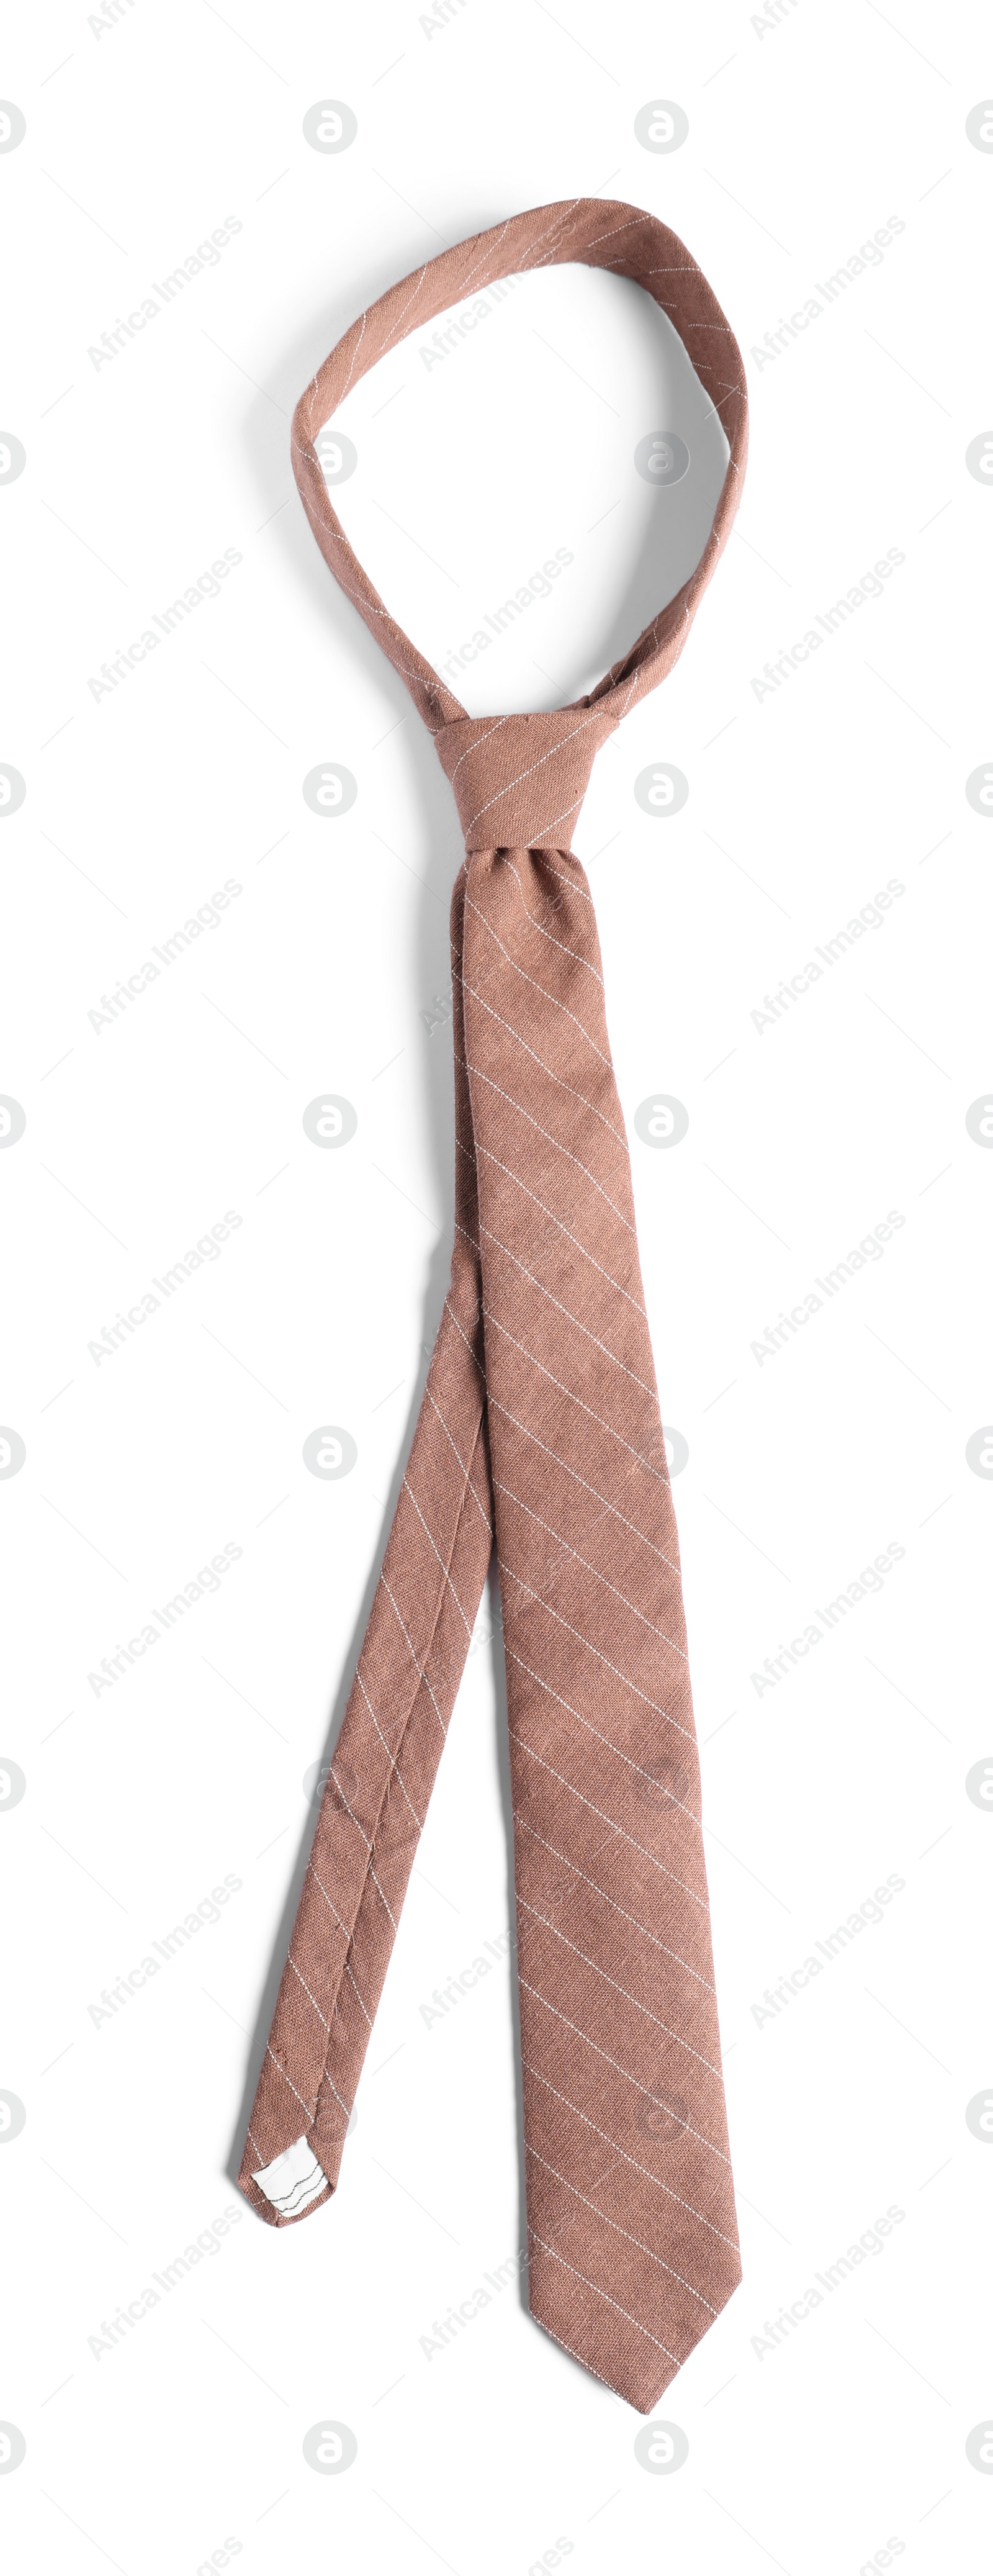 Photo of One striped necktie isolated on white, top view